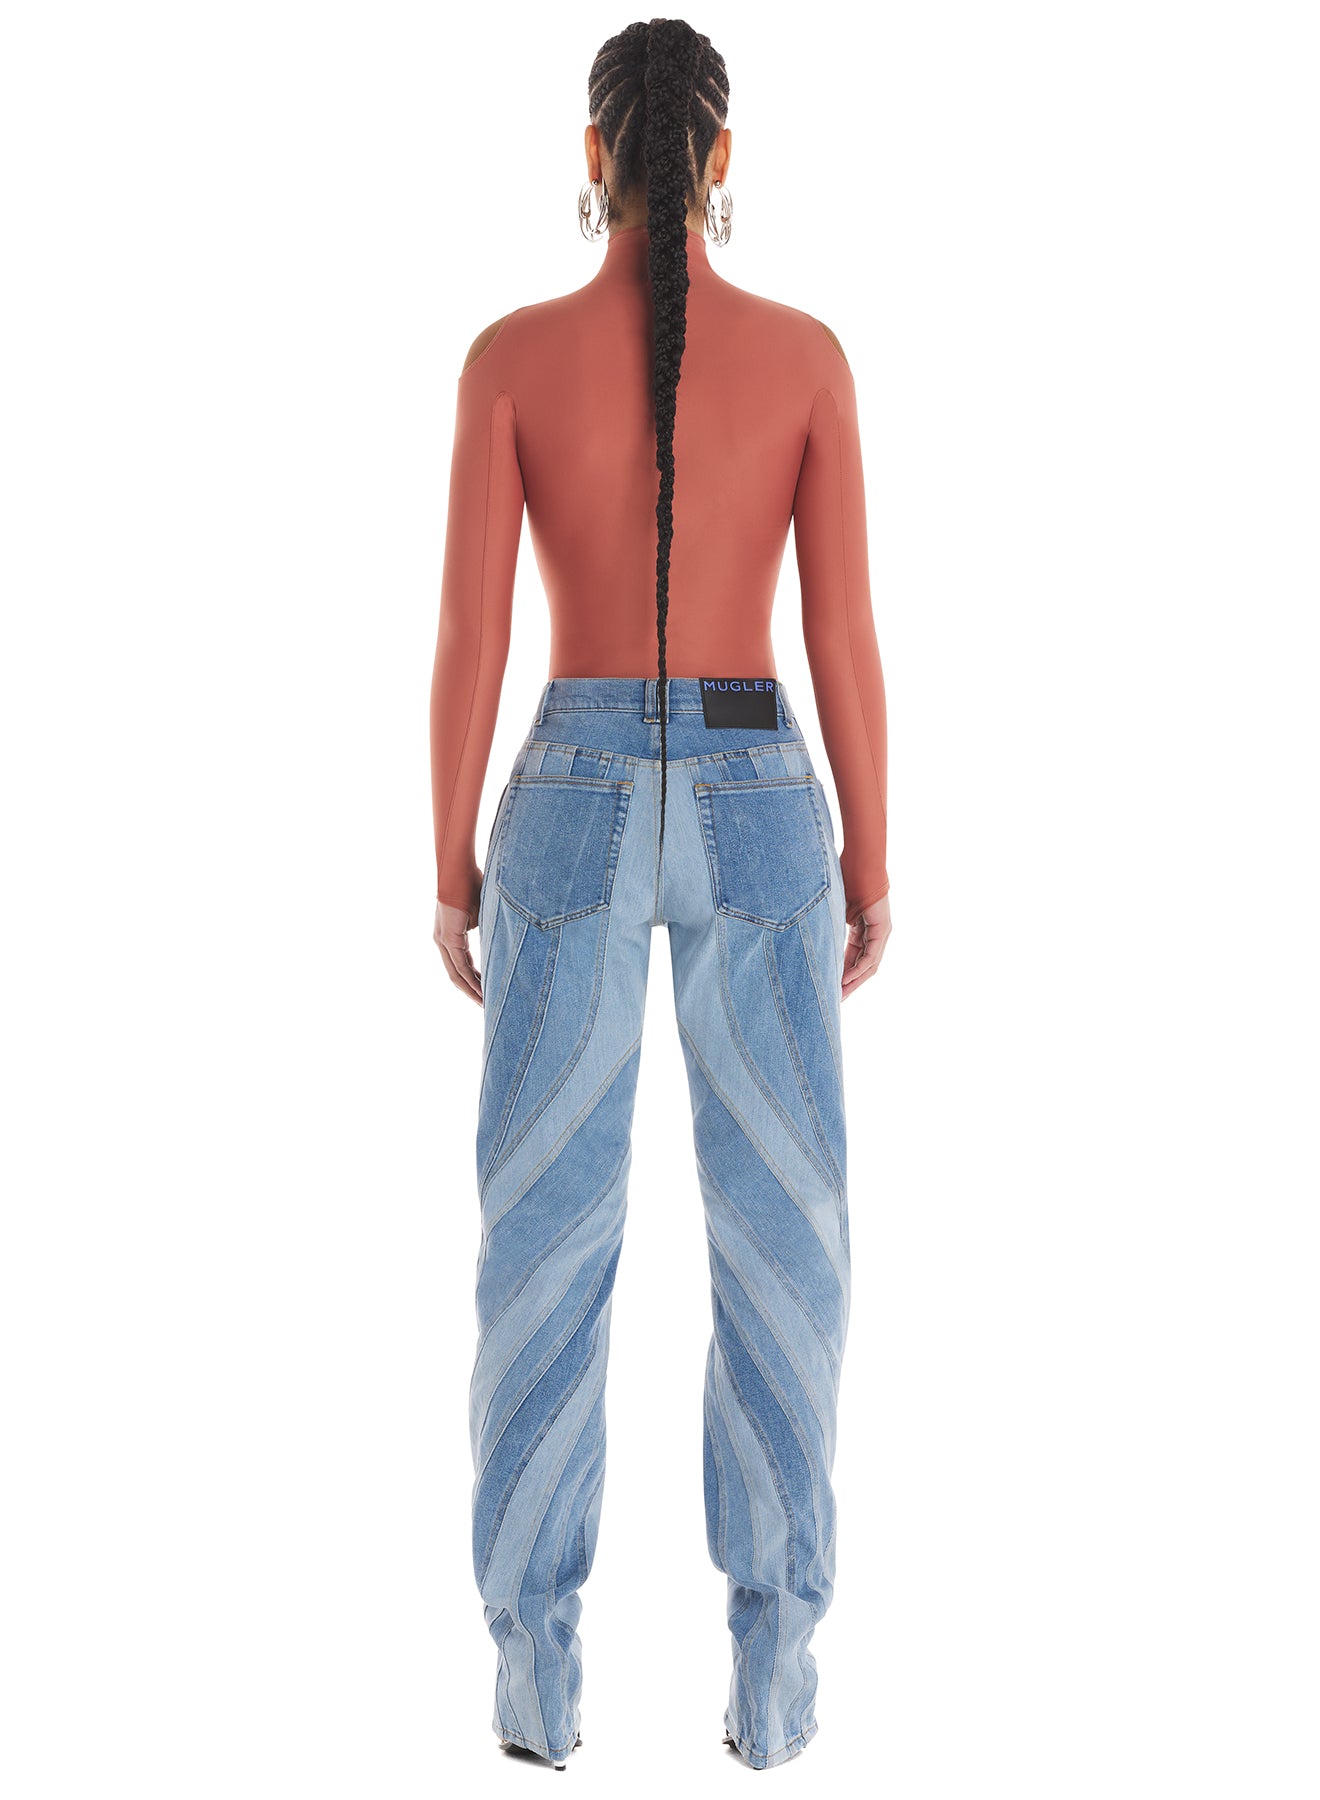 Spiral baggy jeans